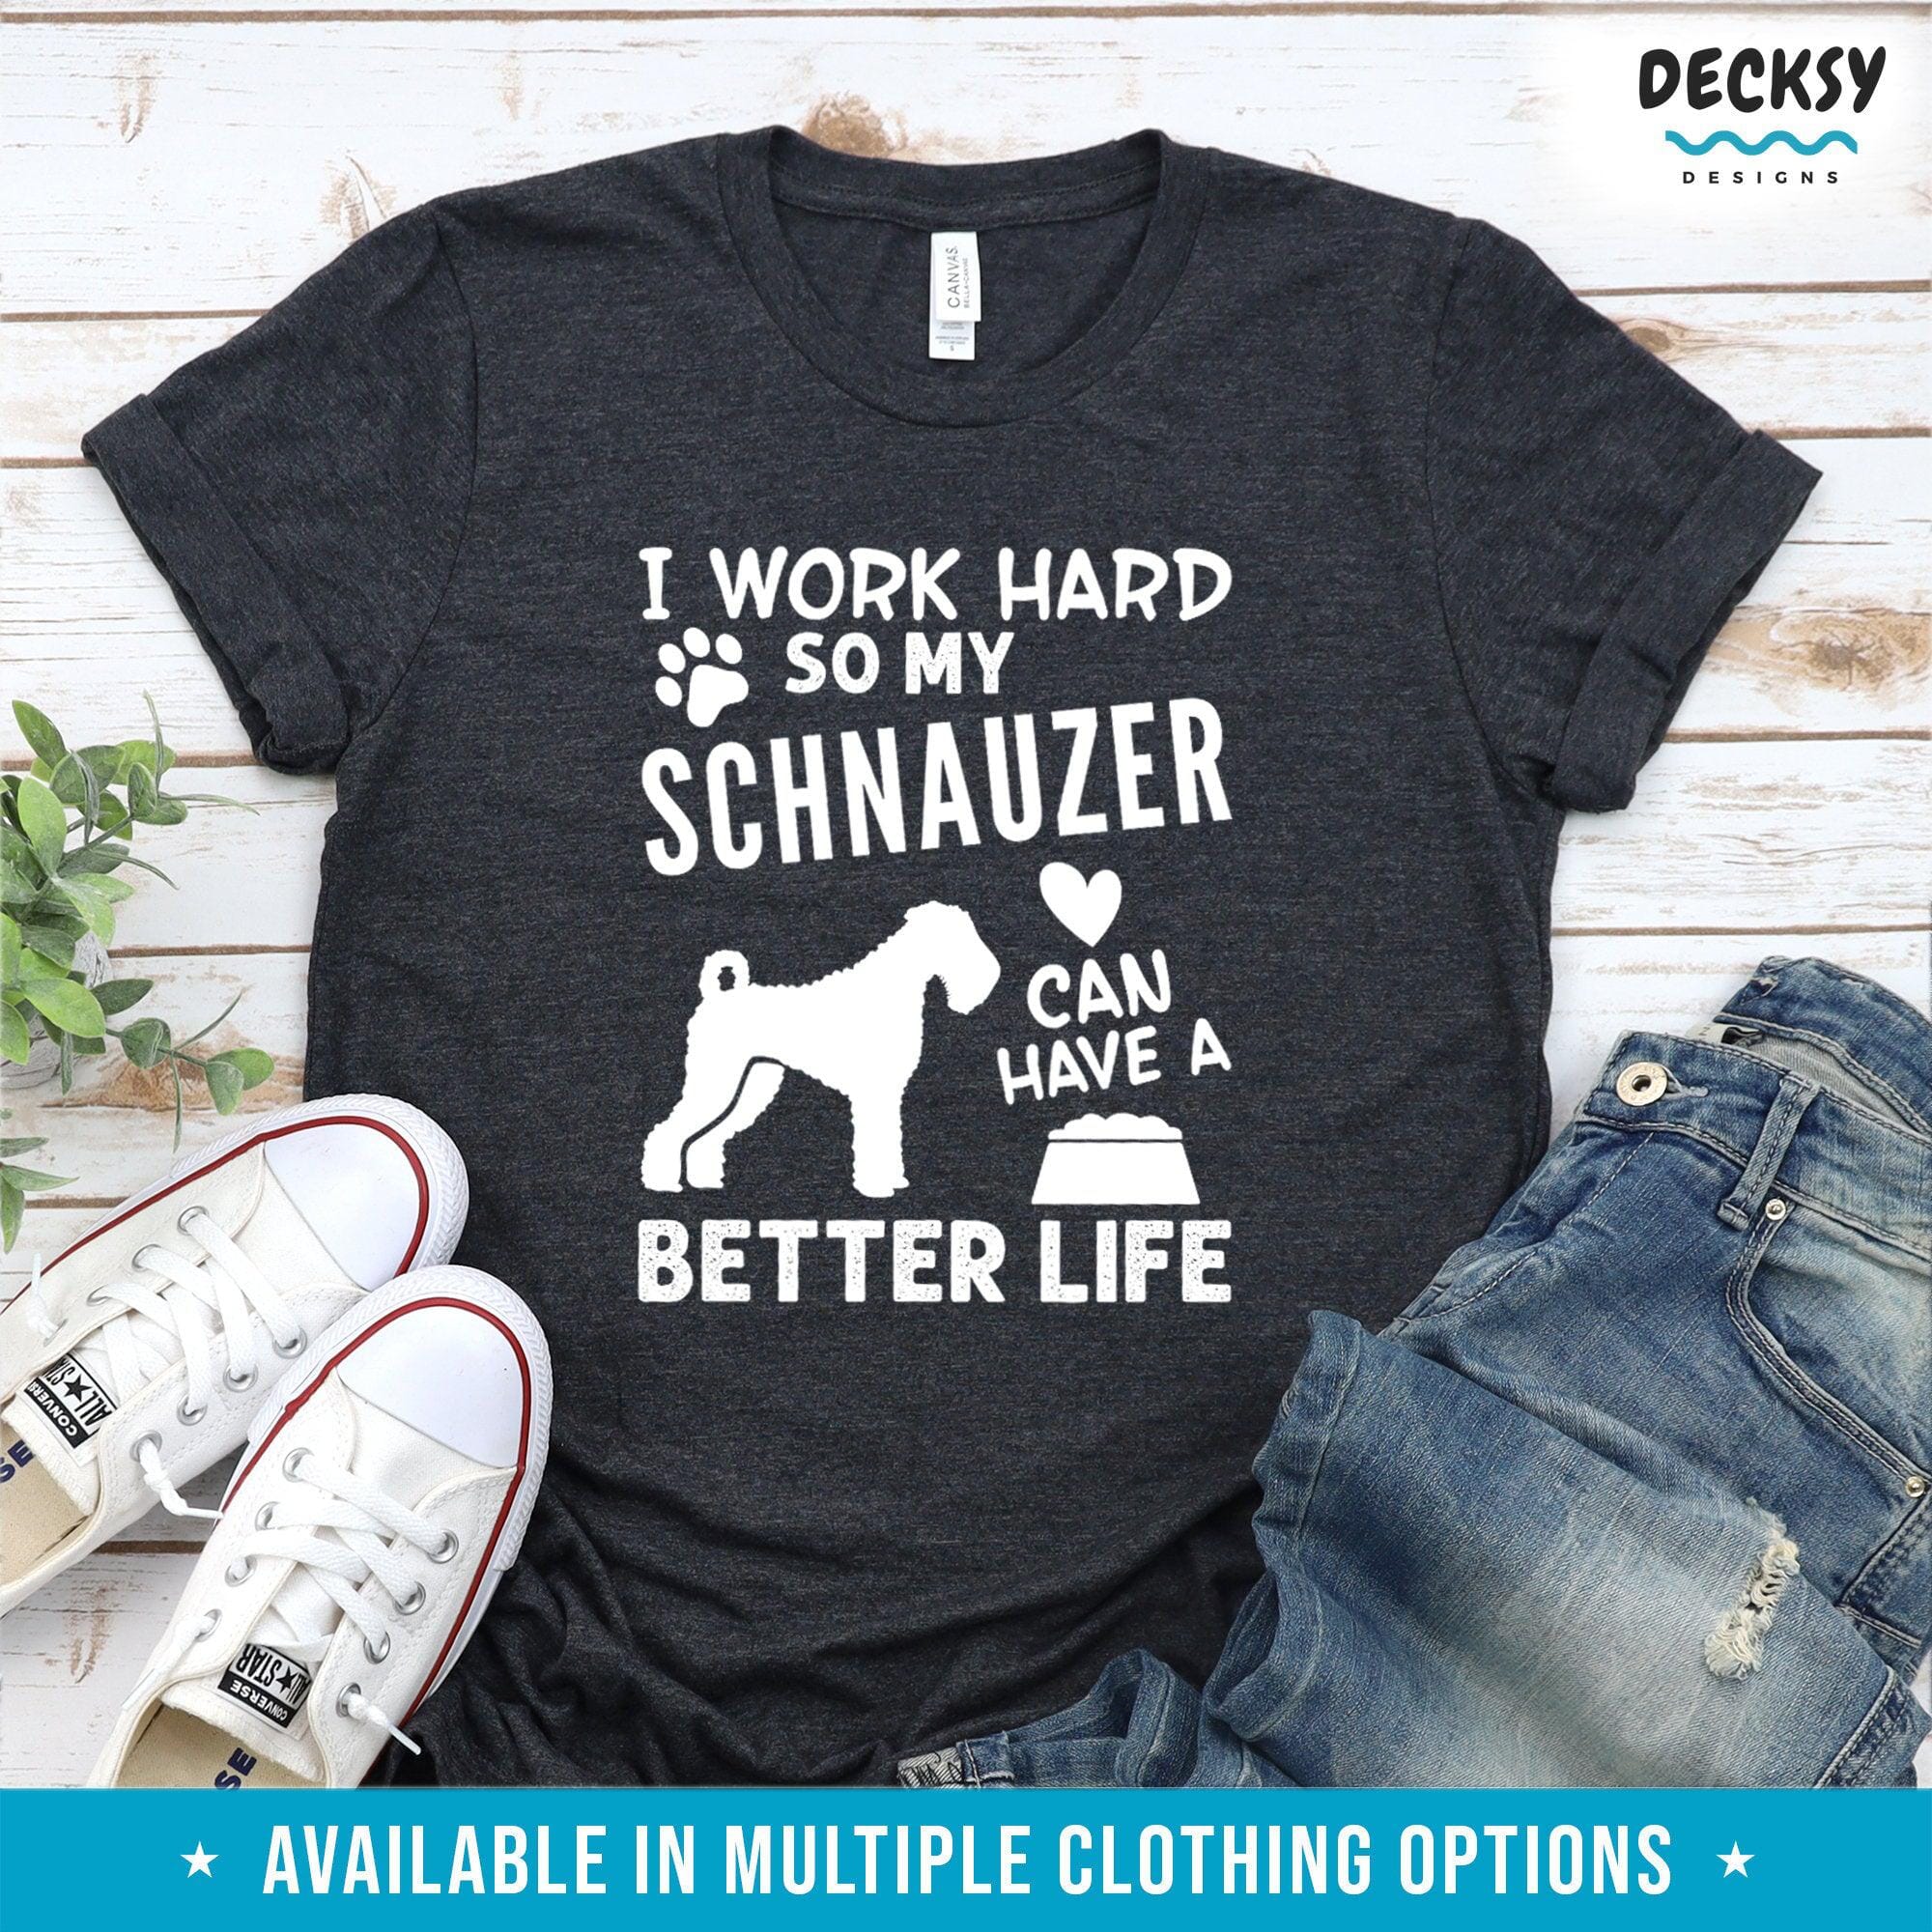 Schnauzer Tshirt, Gift For Dog Lover-Clothing:Gender-Neutral Adult Clothing:Tops & Tees:T-shirts:Graphic Tees-DecksyDesigns